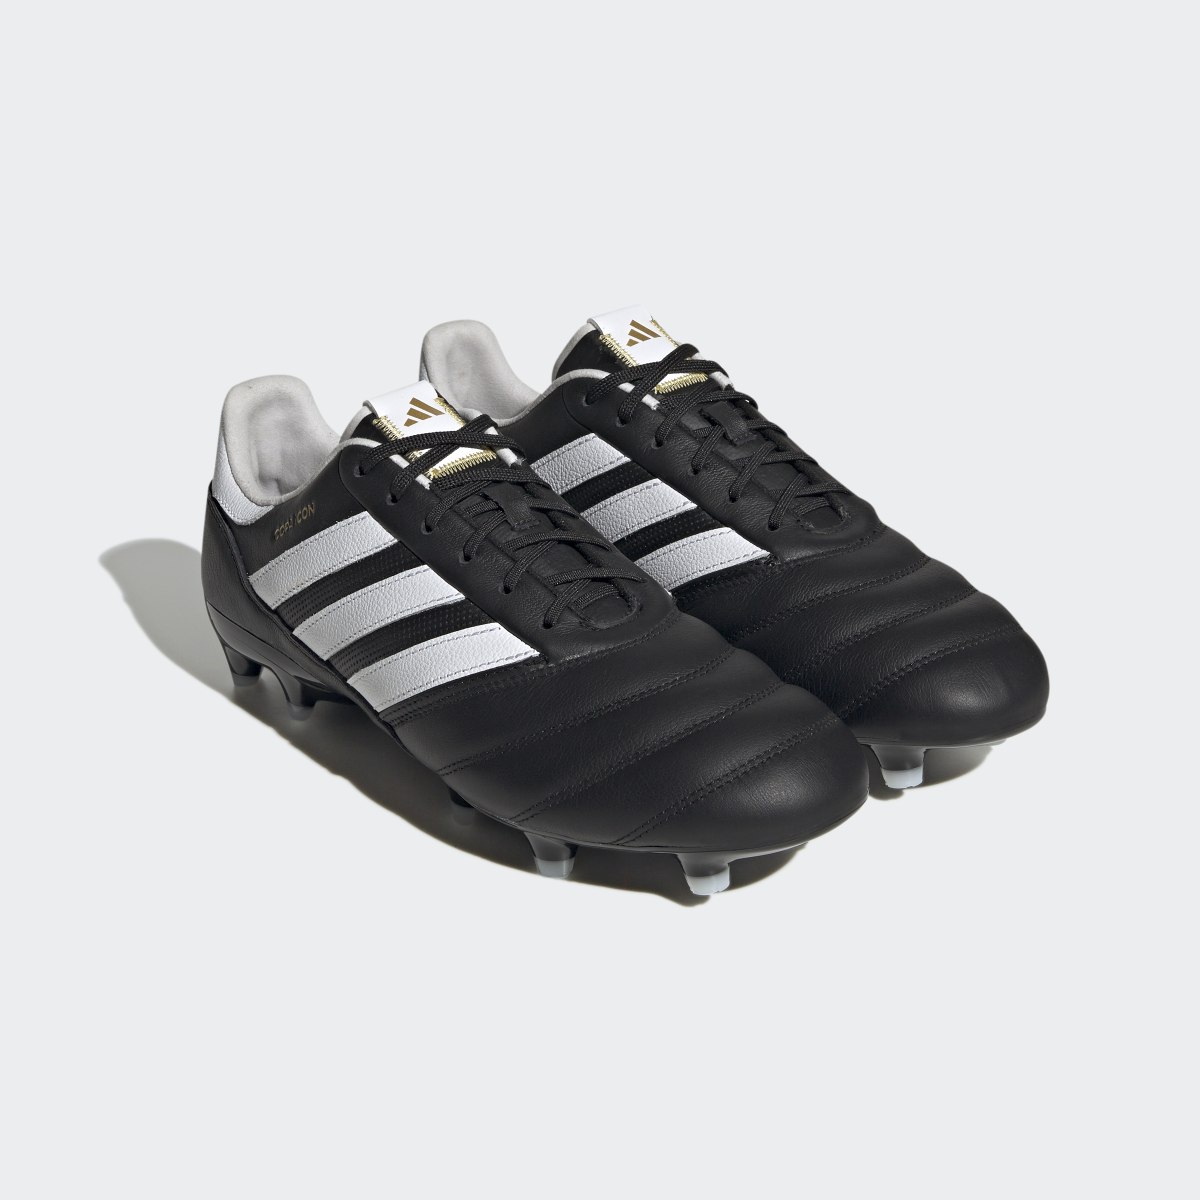 Adidas Copa Icon Firm Ground Boots. 8